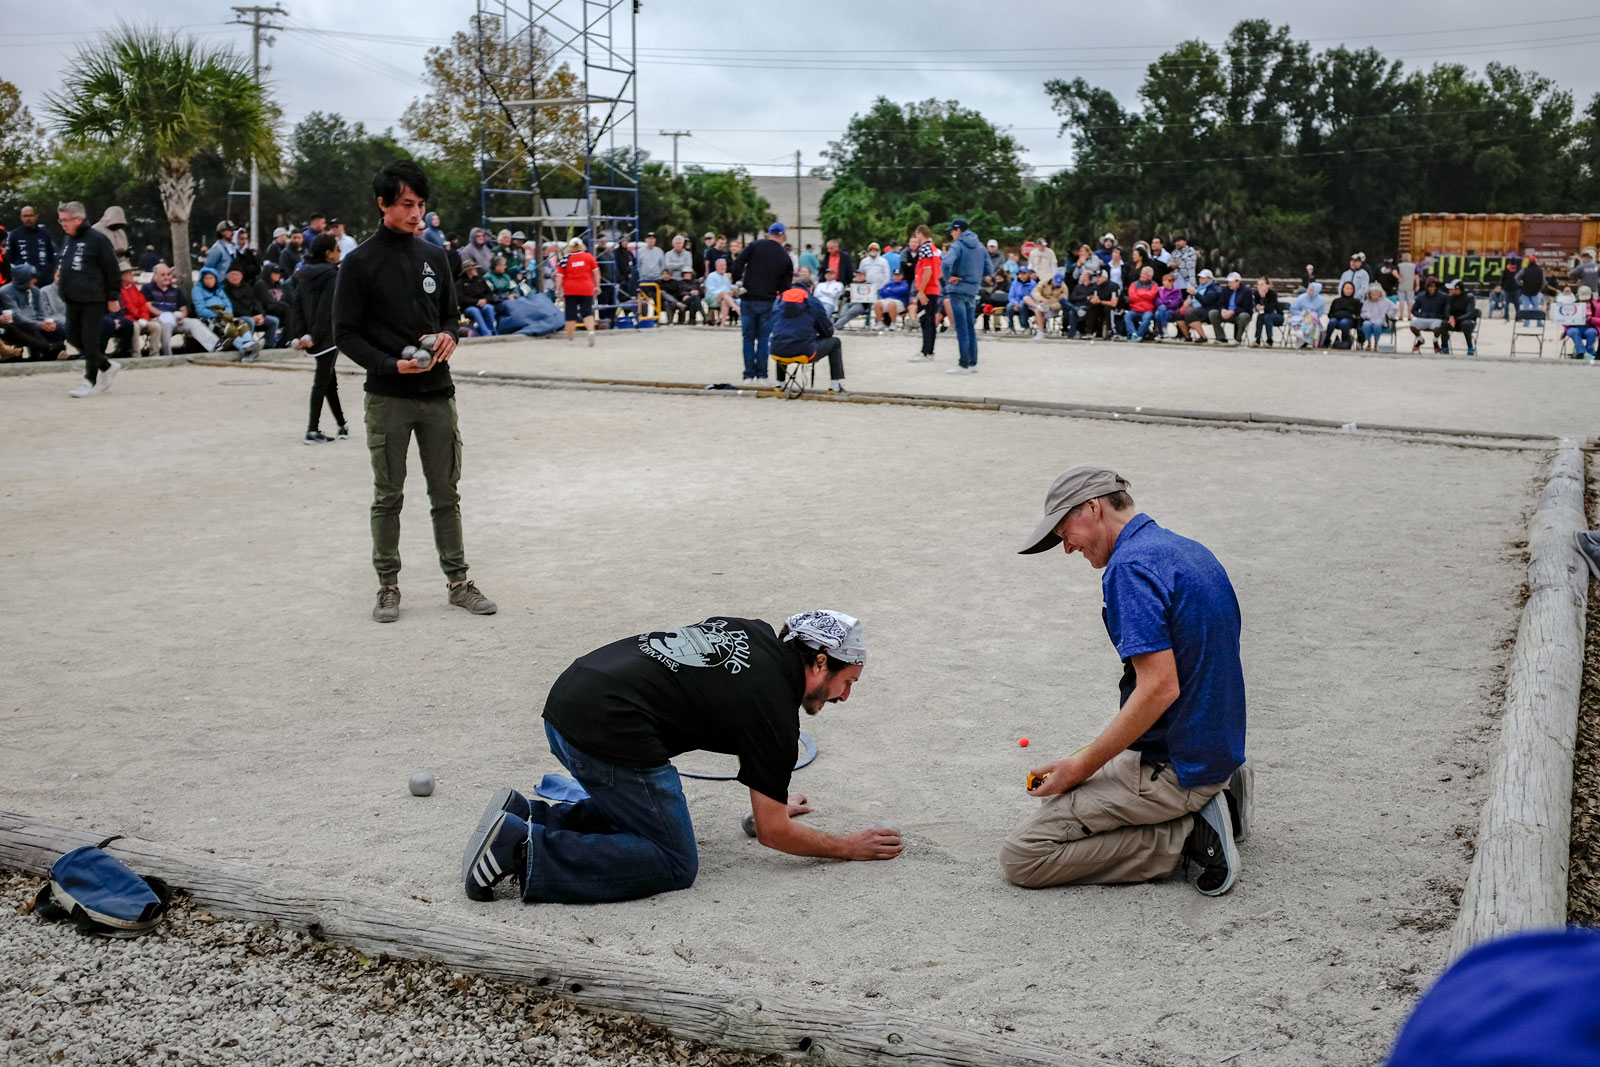 The umpire observes players measuring their throws in petanque